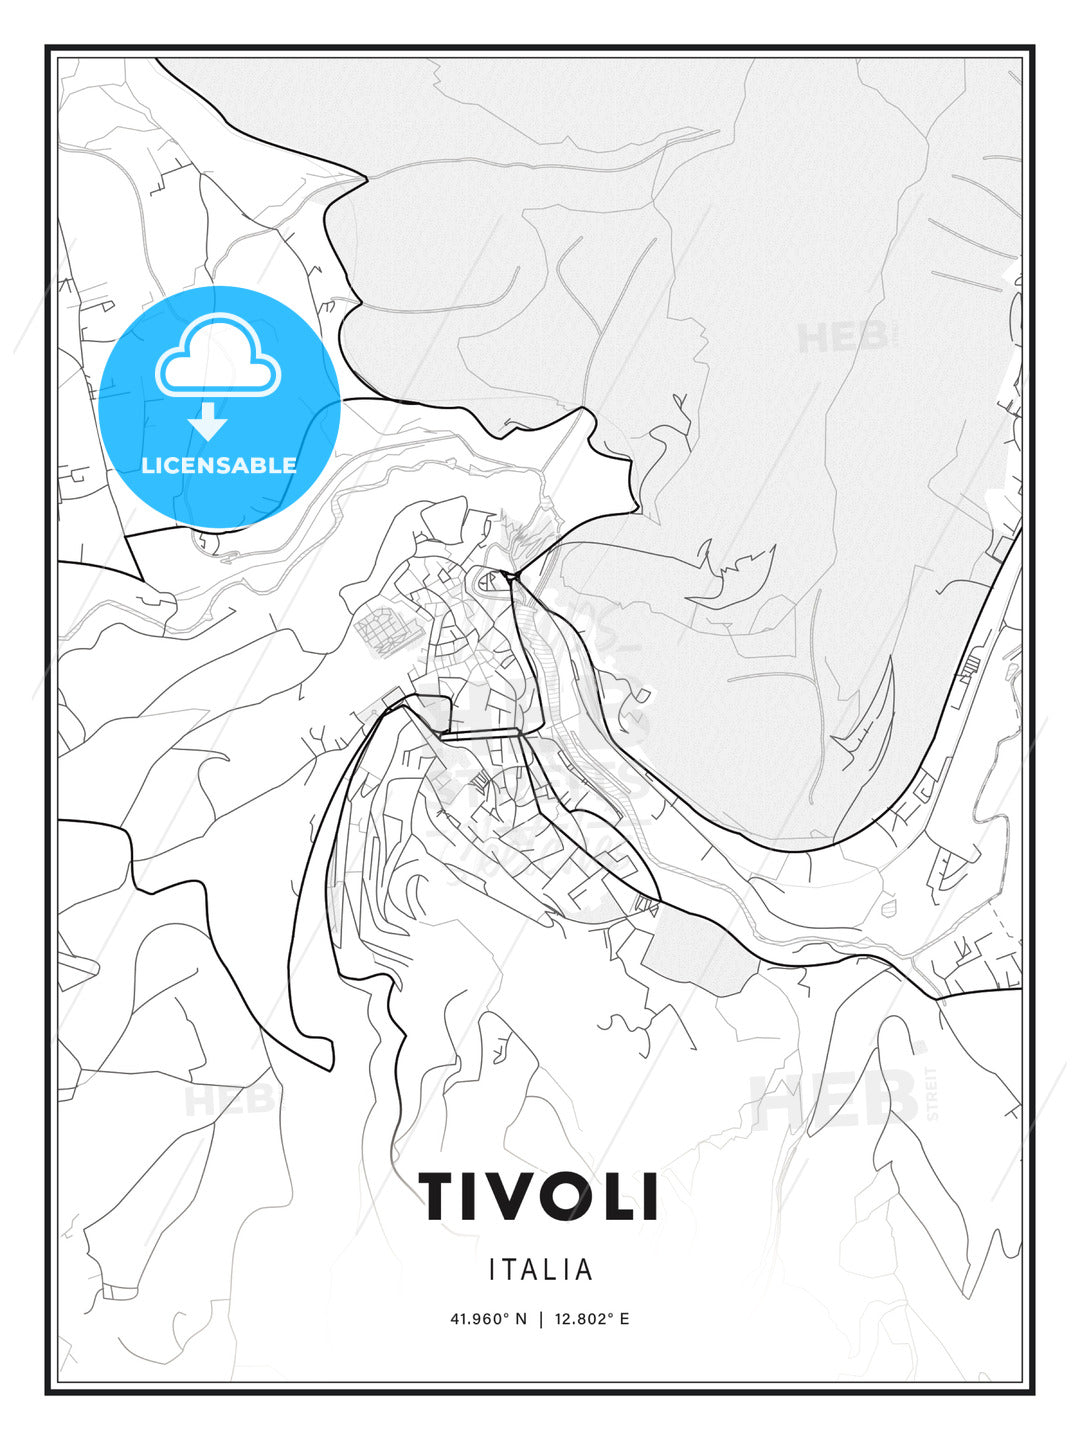 Tivoli, Italy, Modern Print Template in Various Formats - HEBSTREITS Sketches